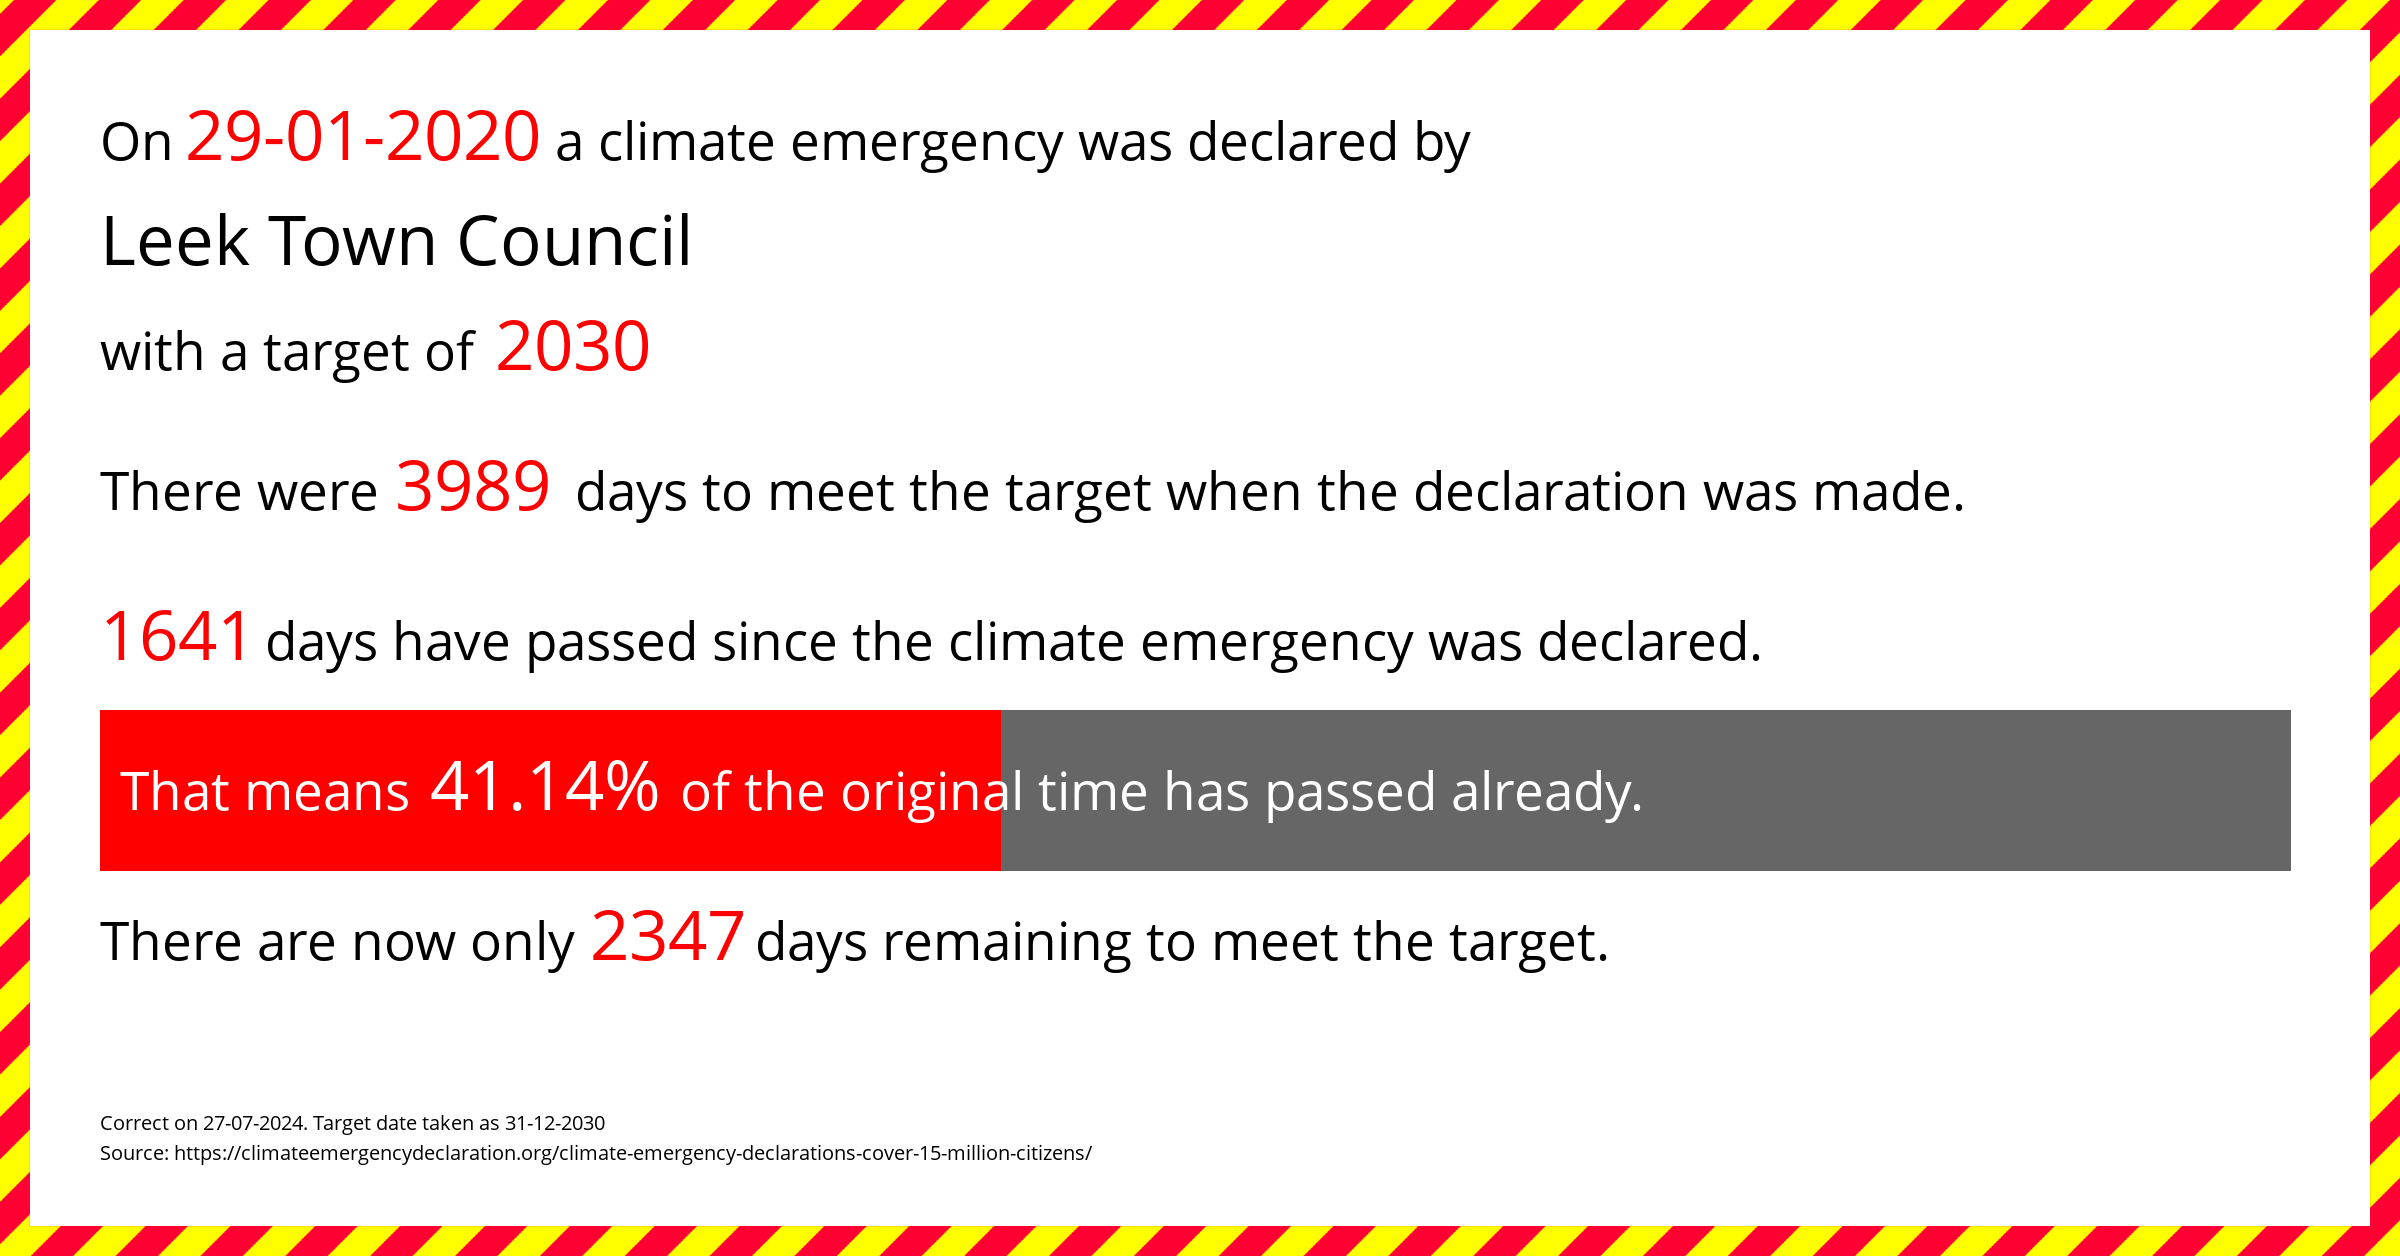 Leek Town Council declared a Climate emergency on Wednesday 29th January 2020, with a target of 2030.